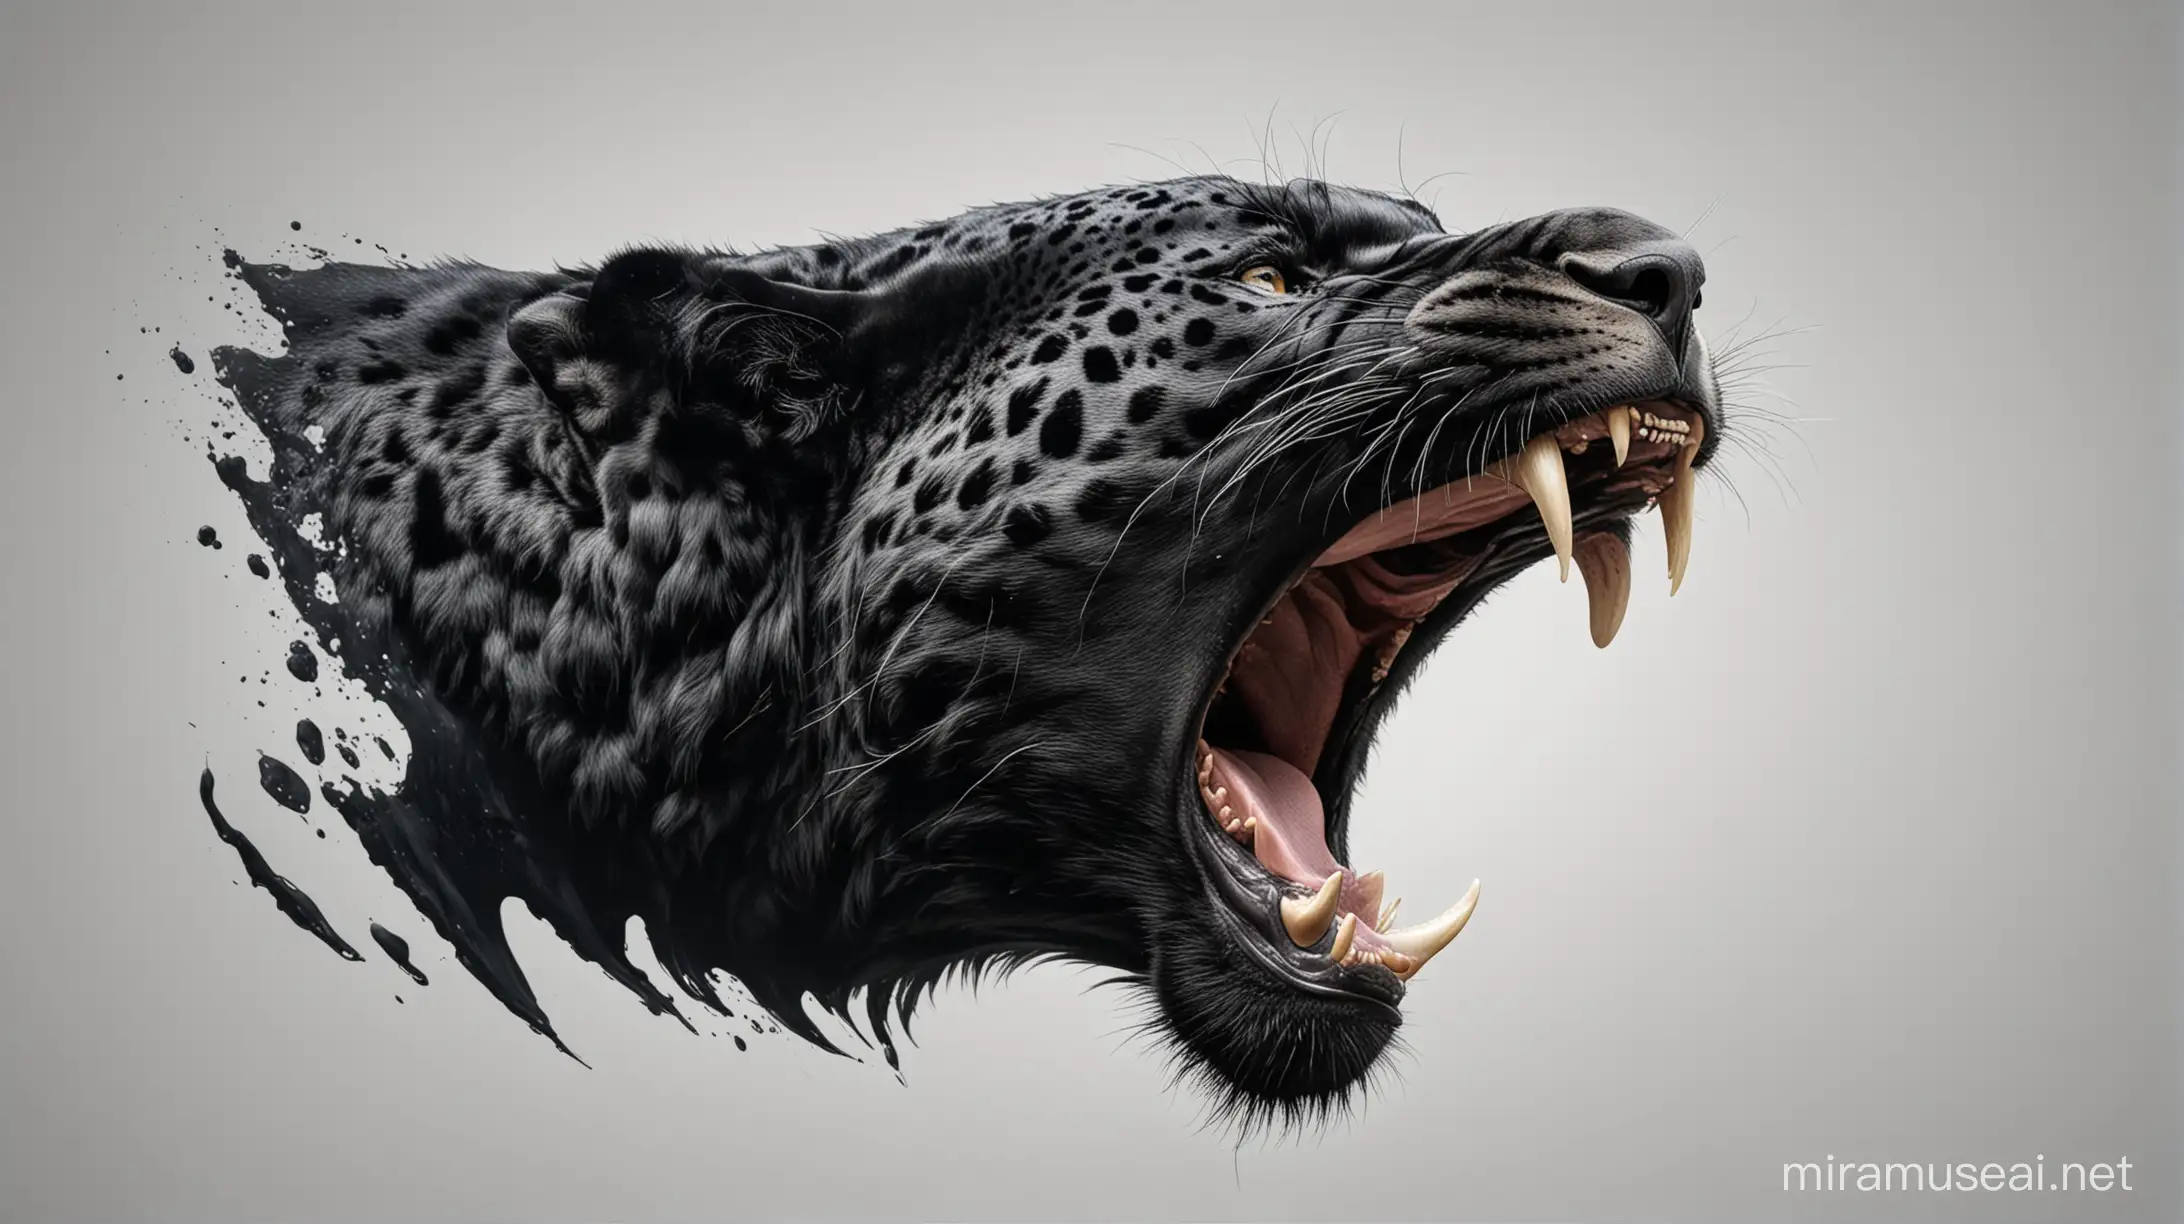 a head of a black jaguar roaring aggressively from a side perspective in a white background. logo style